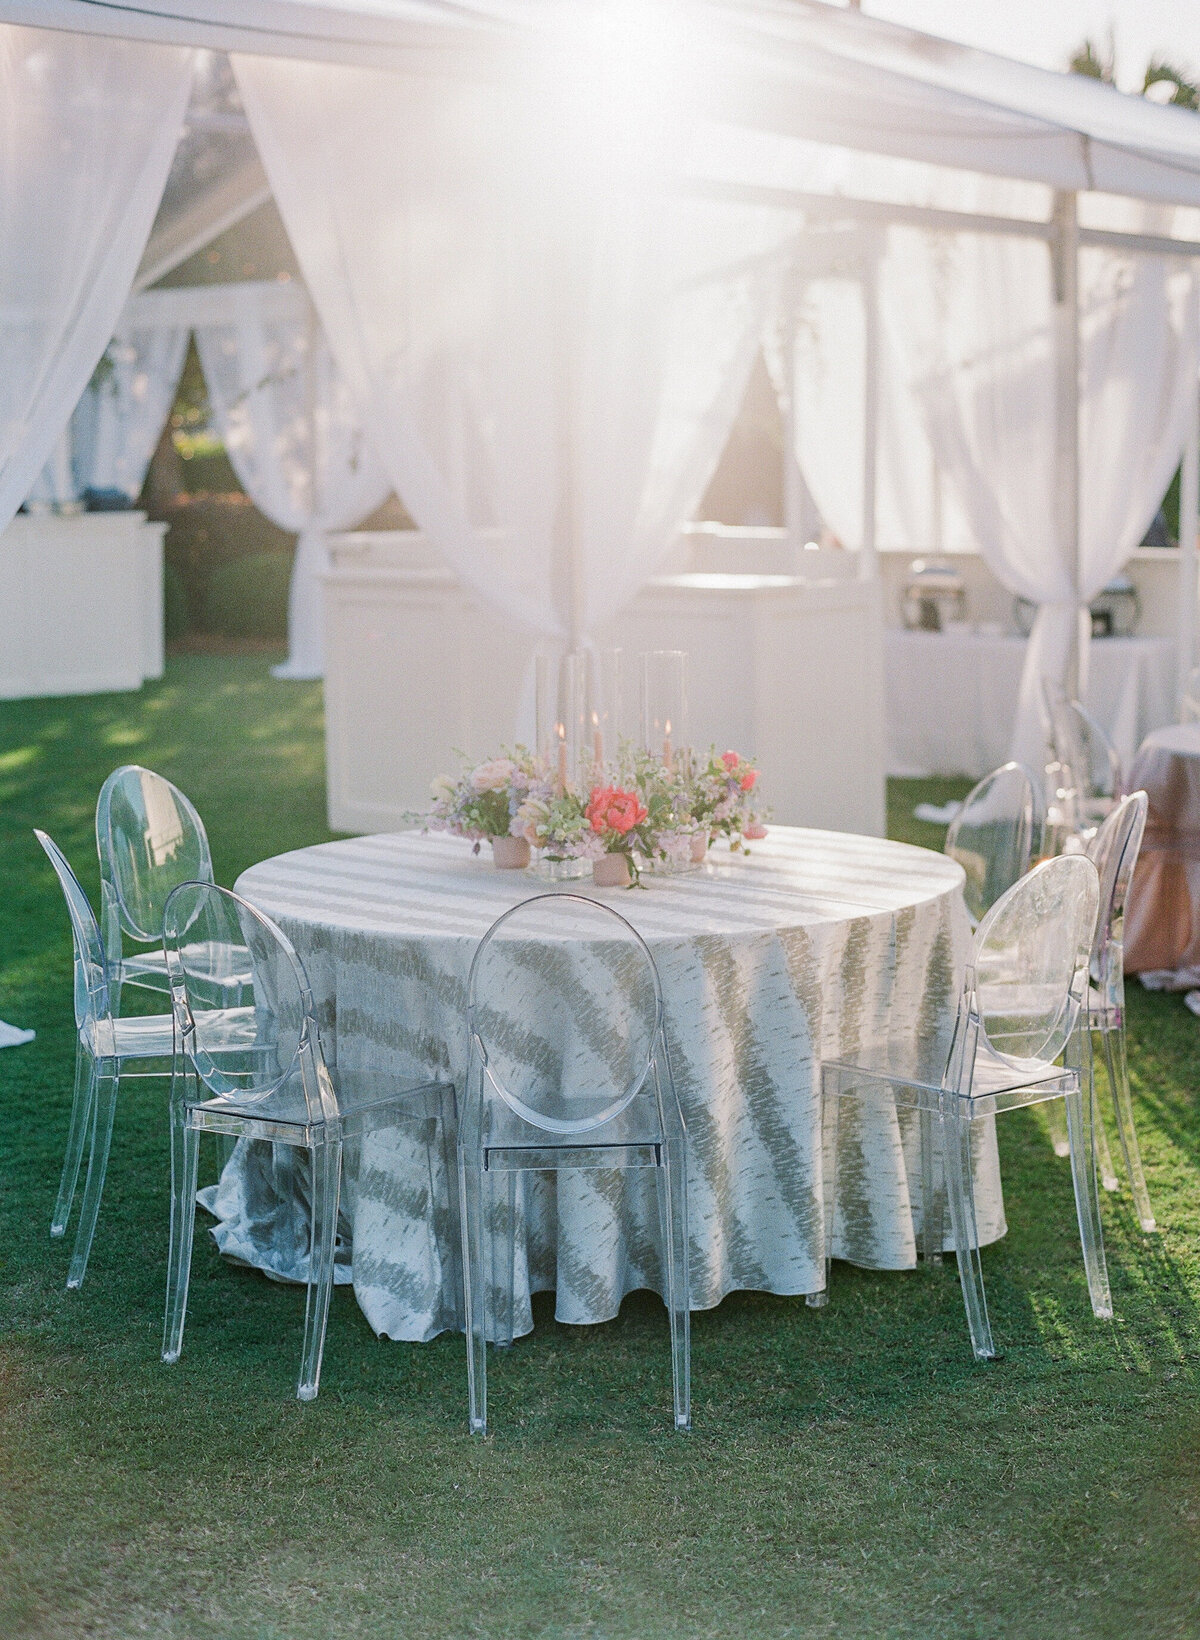 striped-tablecloth-ghost-chairs-luxury-wedding-30a